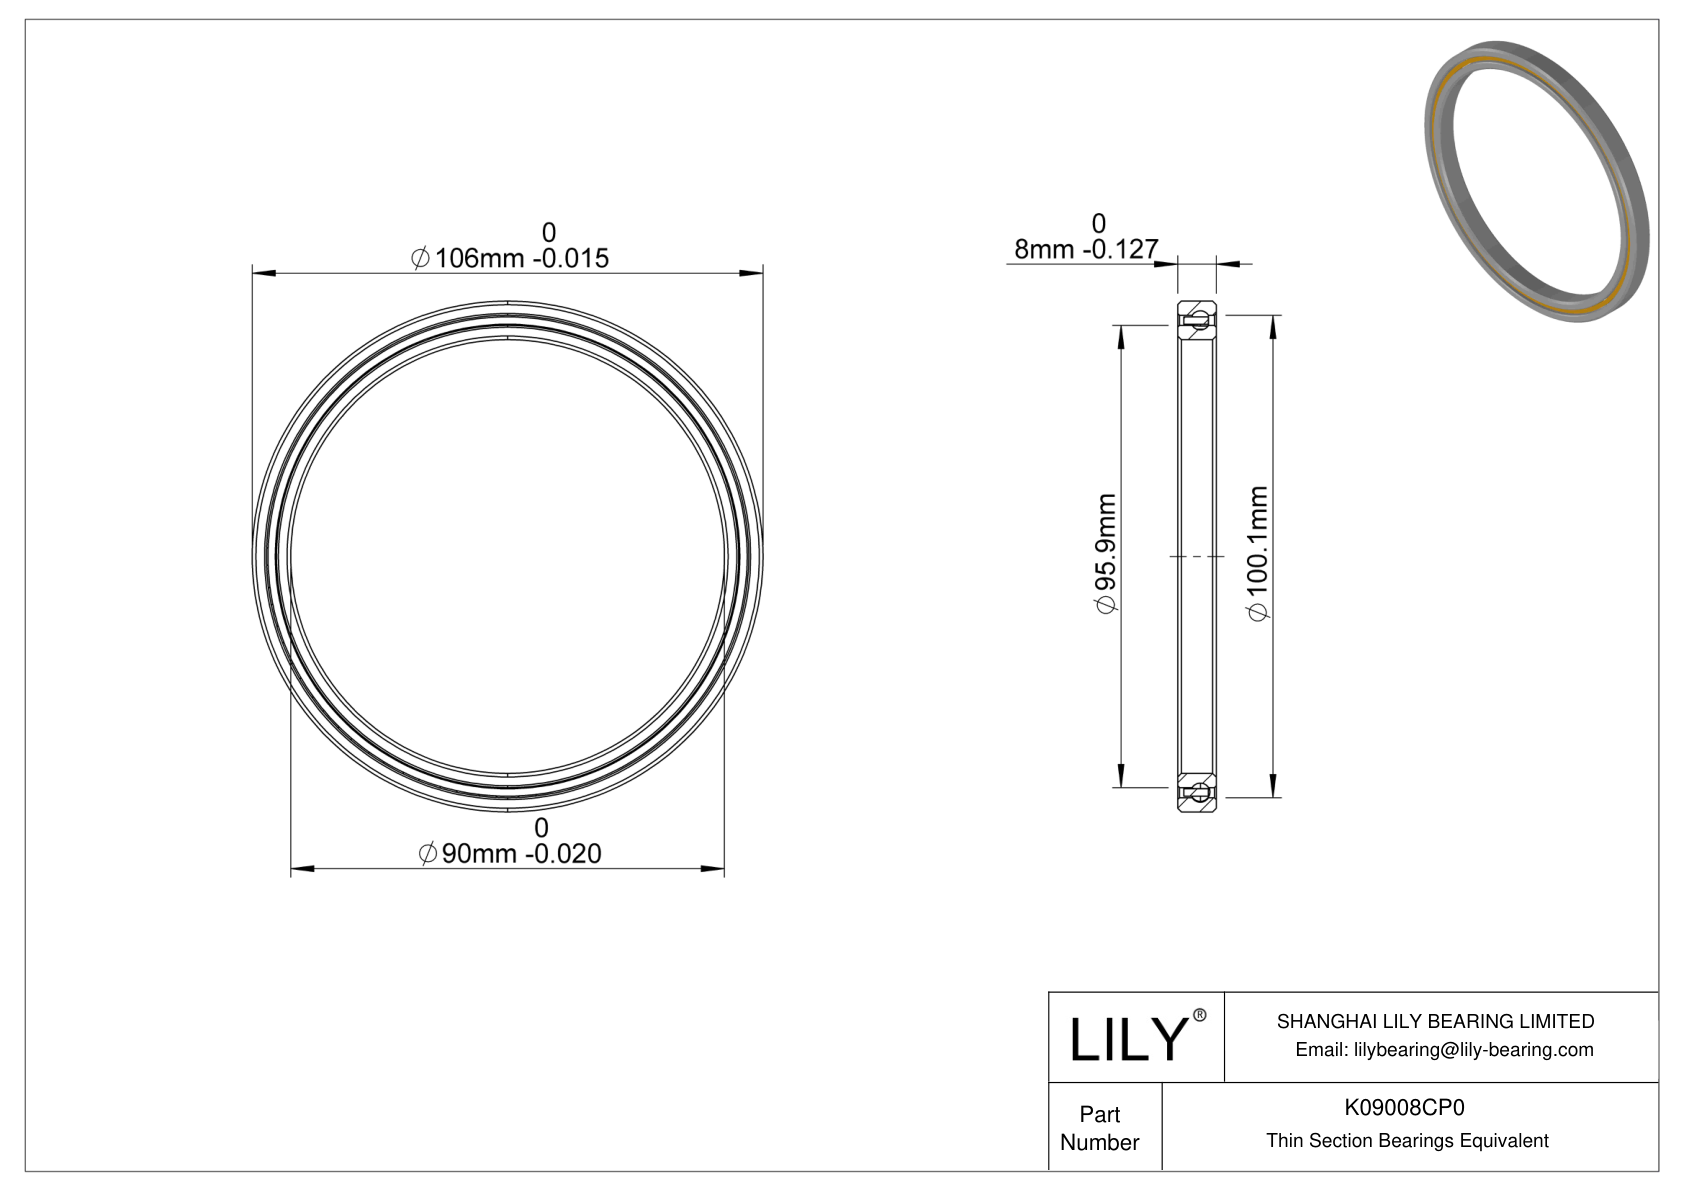 K09008CP0 Constant Section (CS) Bearings cad drawing